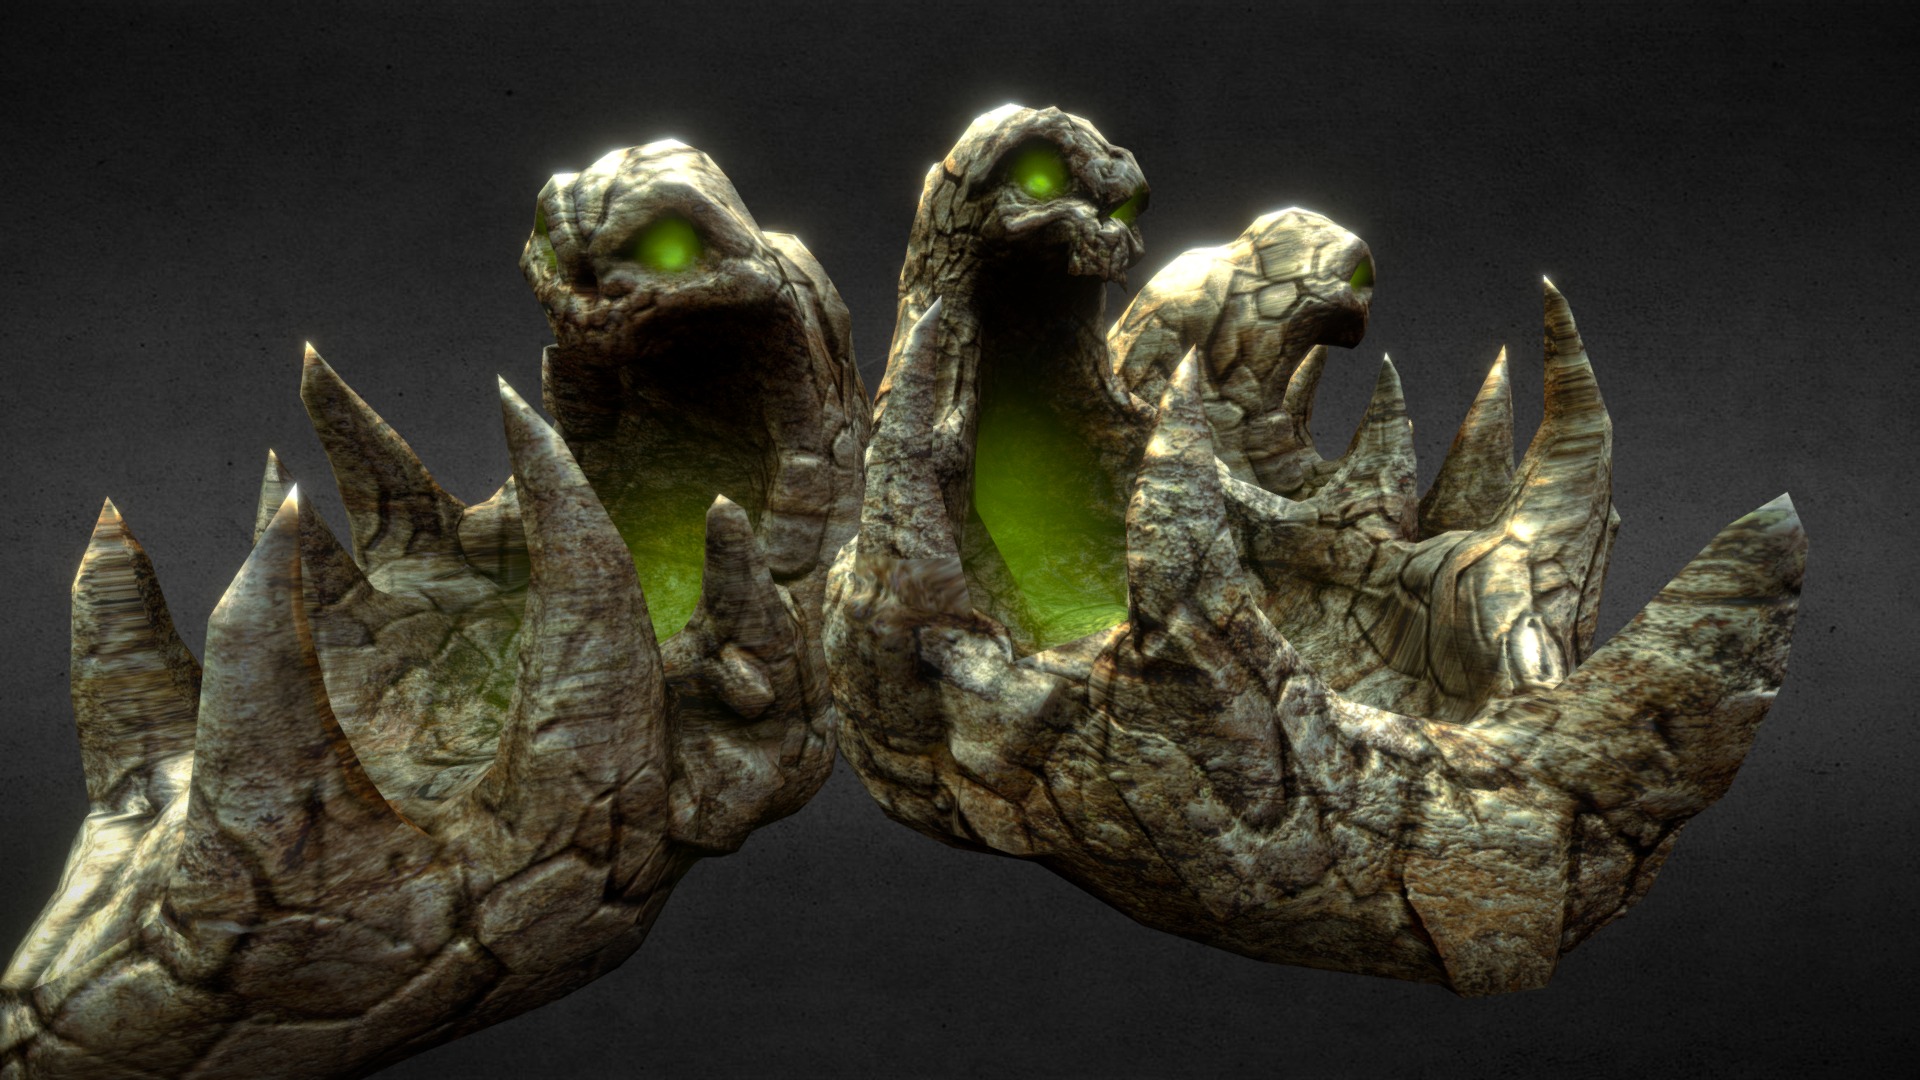 3D model Lazarus Pits - This is a 3D model of the Lazarus Pits. The 3D model is about a green lizard on a branch.